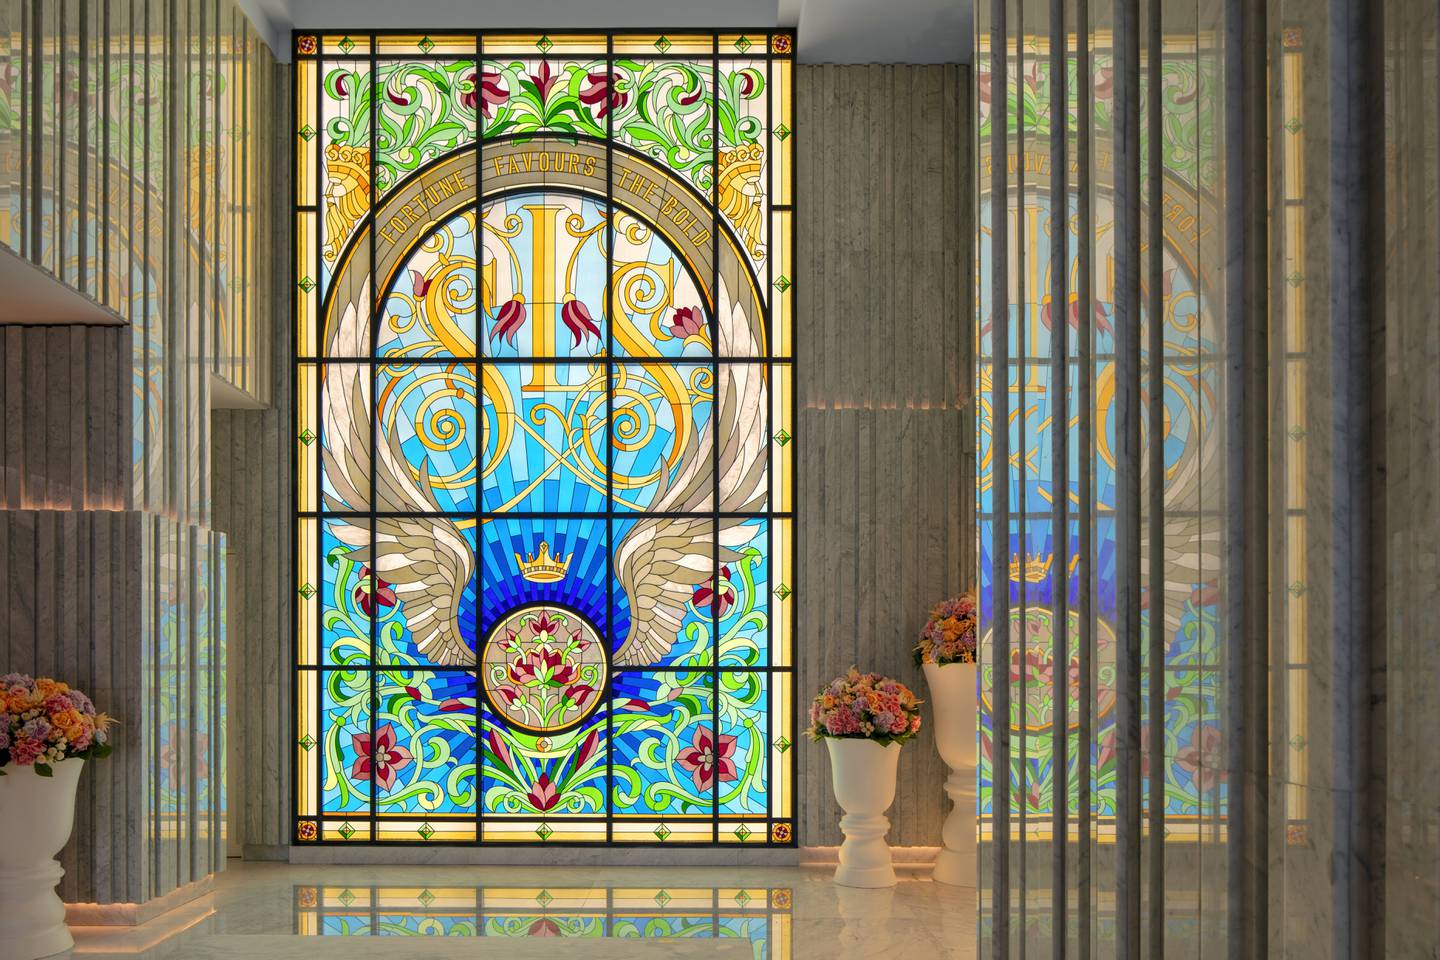 The lobby of the SLS Dubai is home to an oversized stained glass window emblazoned with the brand name and the proverb 'fortune favours the bold'